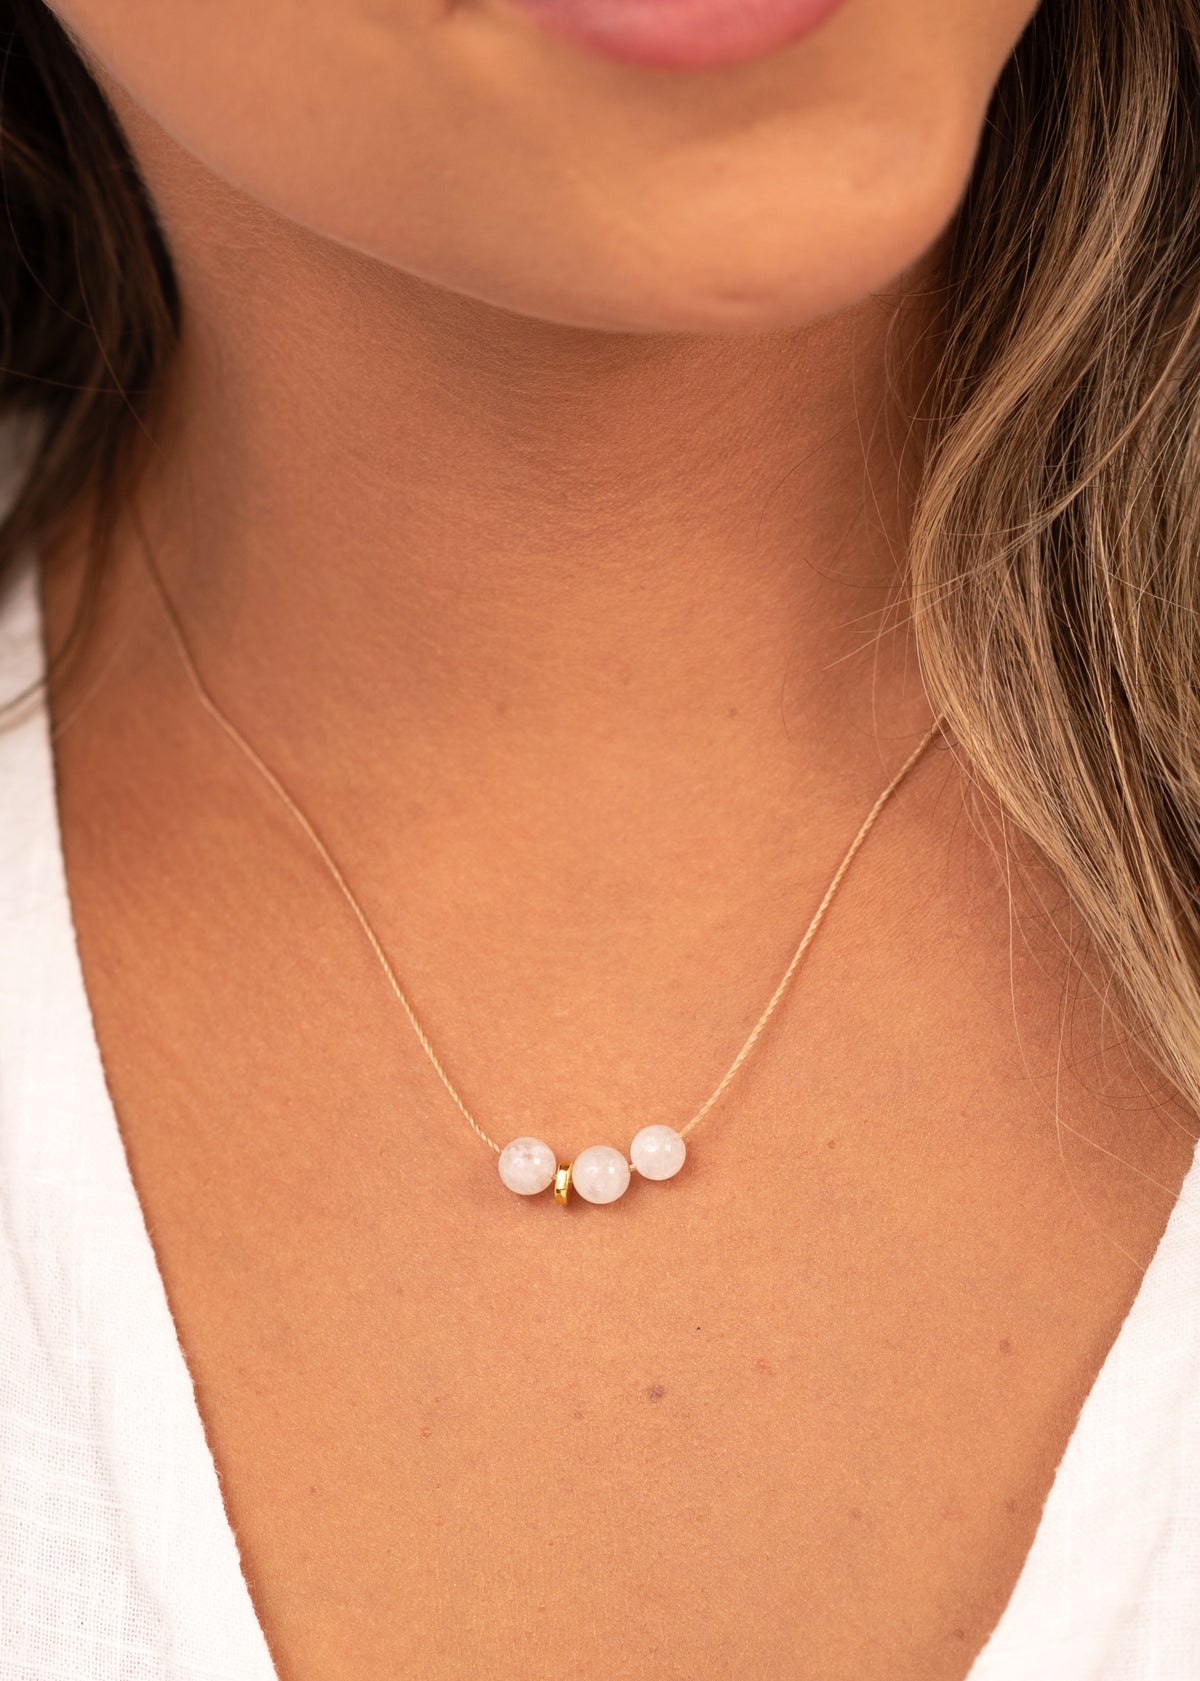 Moonstone Cord Necklace by One & Eight